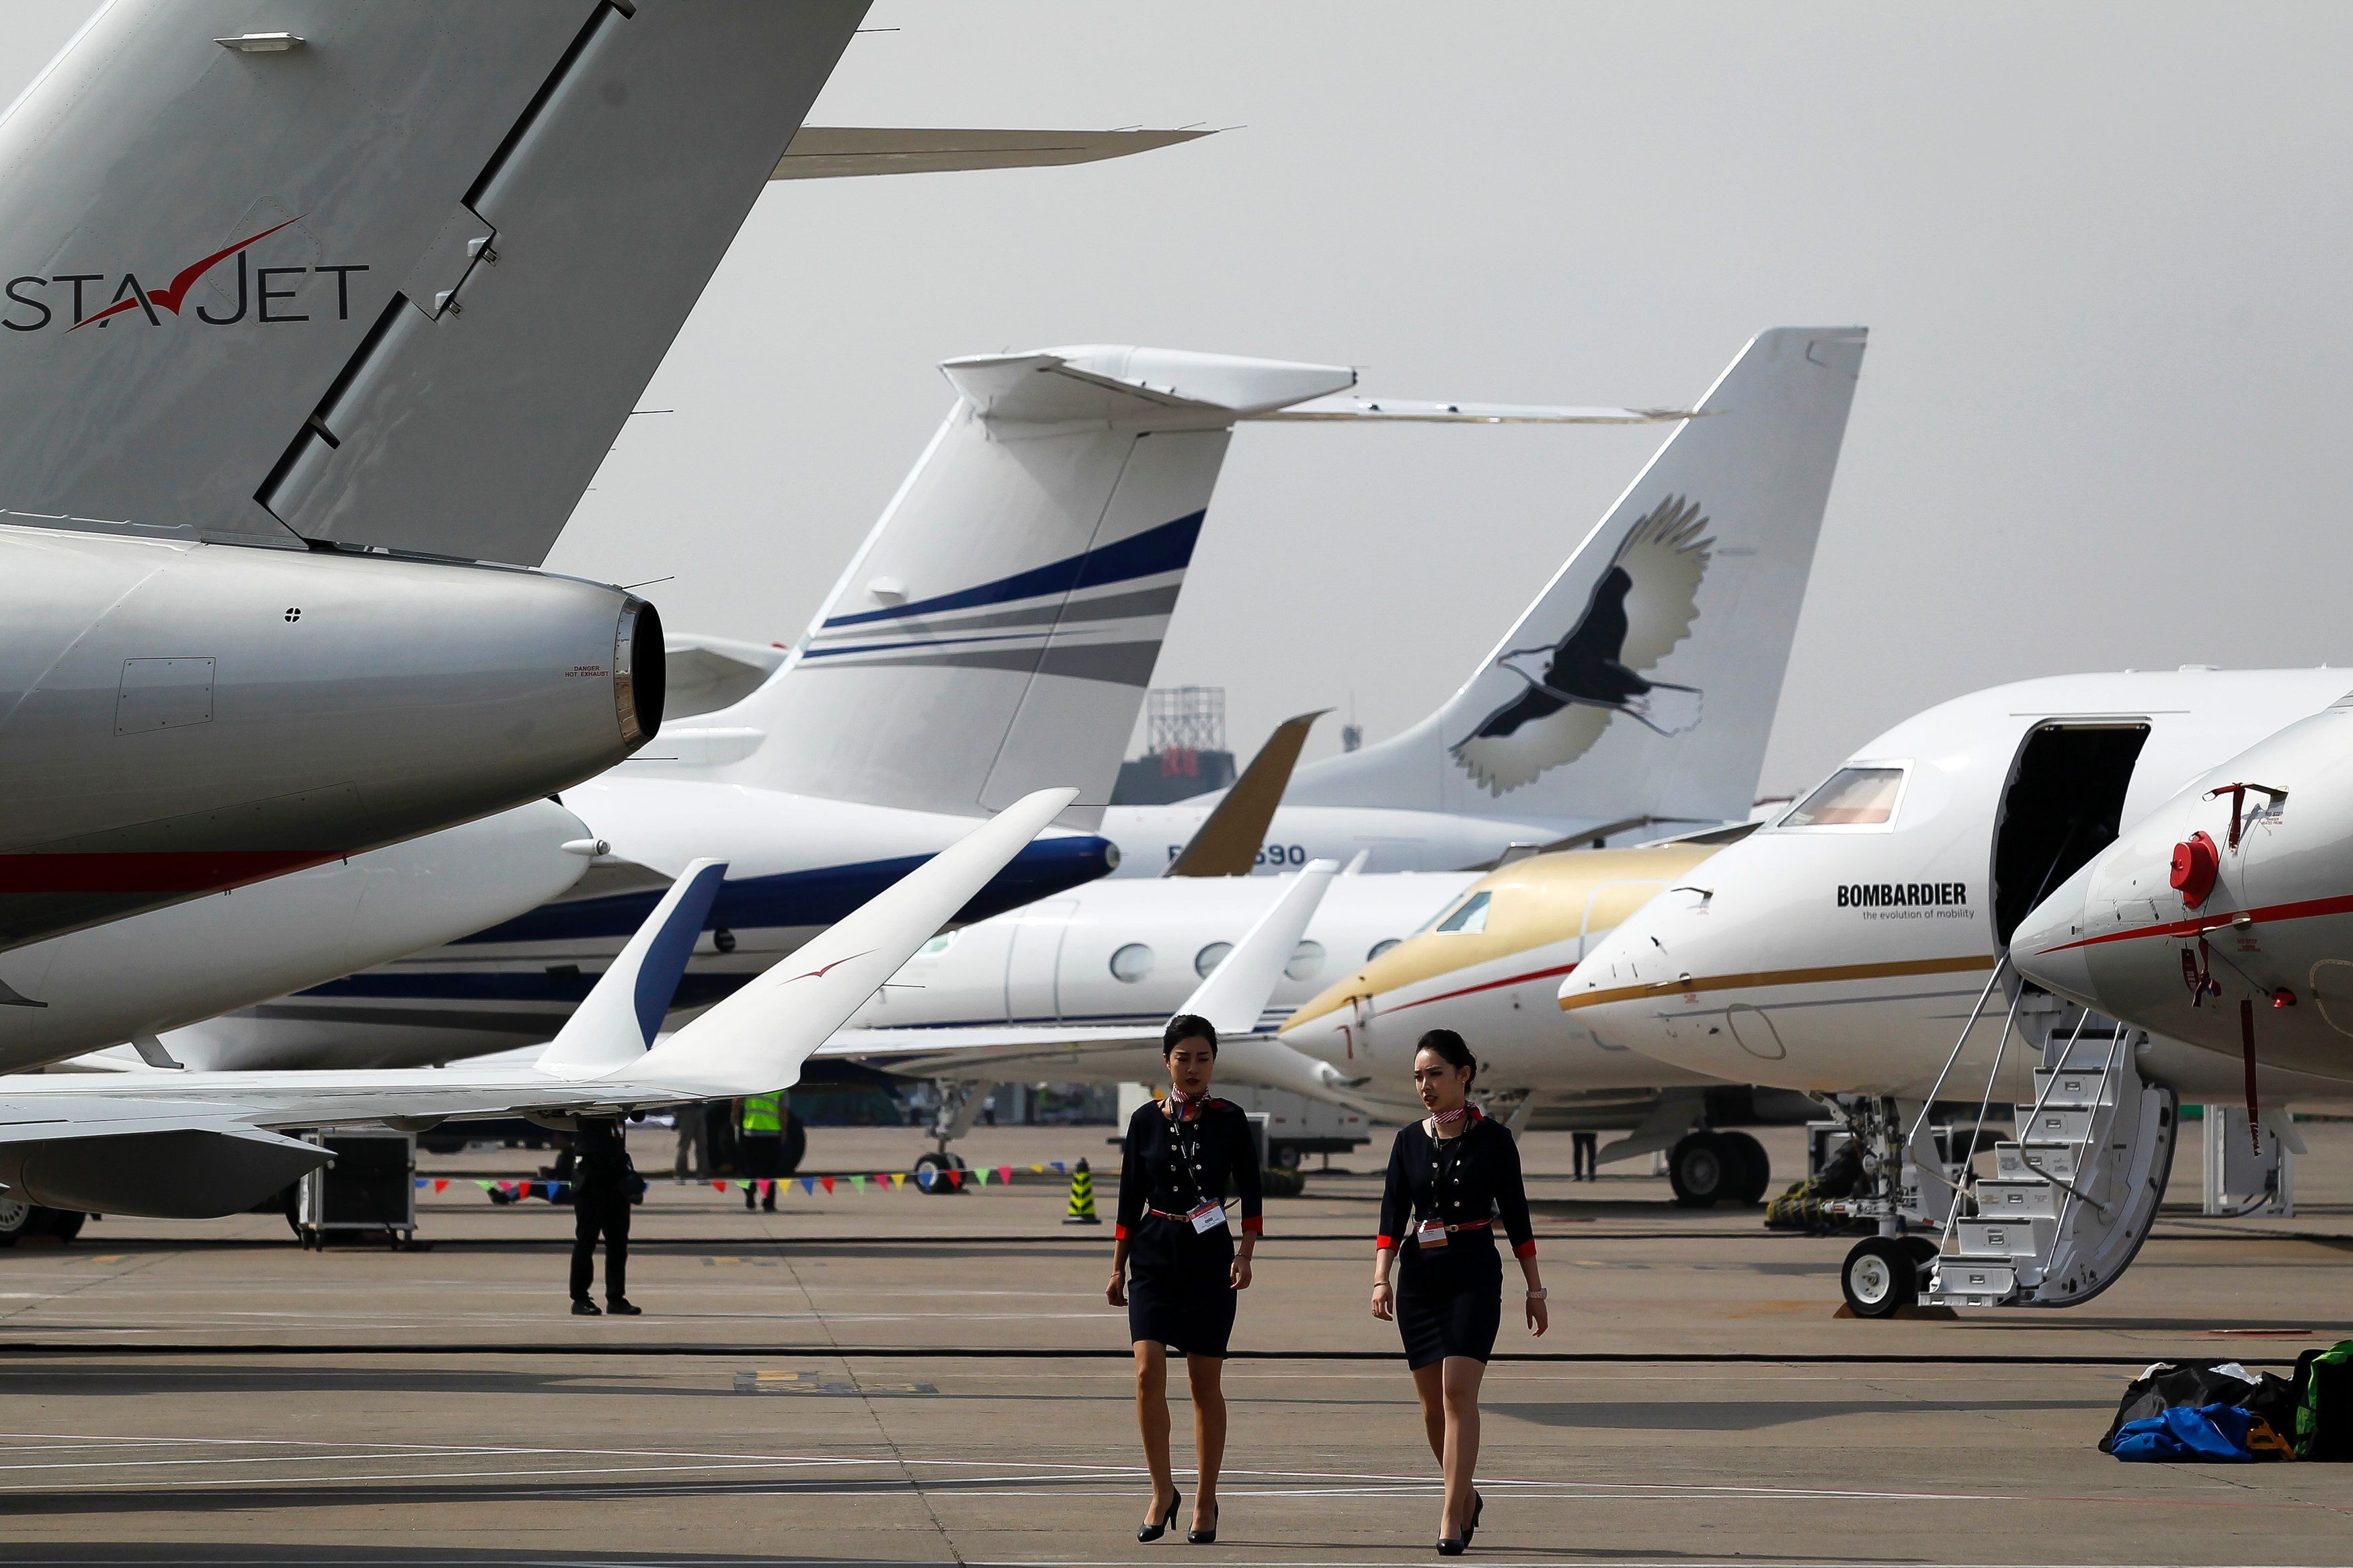 Crew members walk past business jets ahead of the Asian Business Aviation Conference and Exhibition at Shanghai’s Hongqiao Airport last April. Entrepreneurs in mainland China, Hong Kong and Taiwan wishing to charter personal jets currently have fewer options than counterparts elsewhere in Asia. Photo: AFP